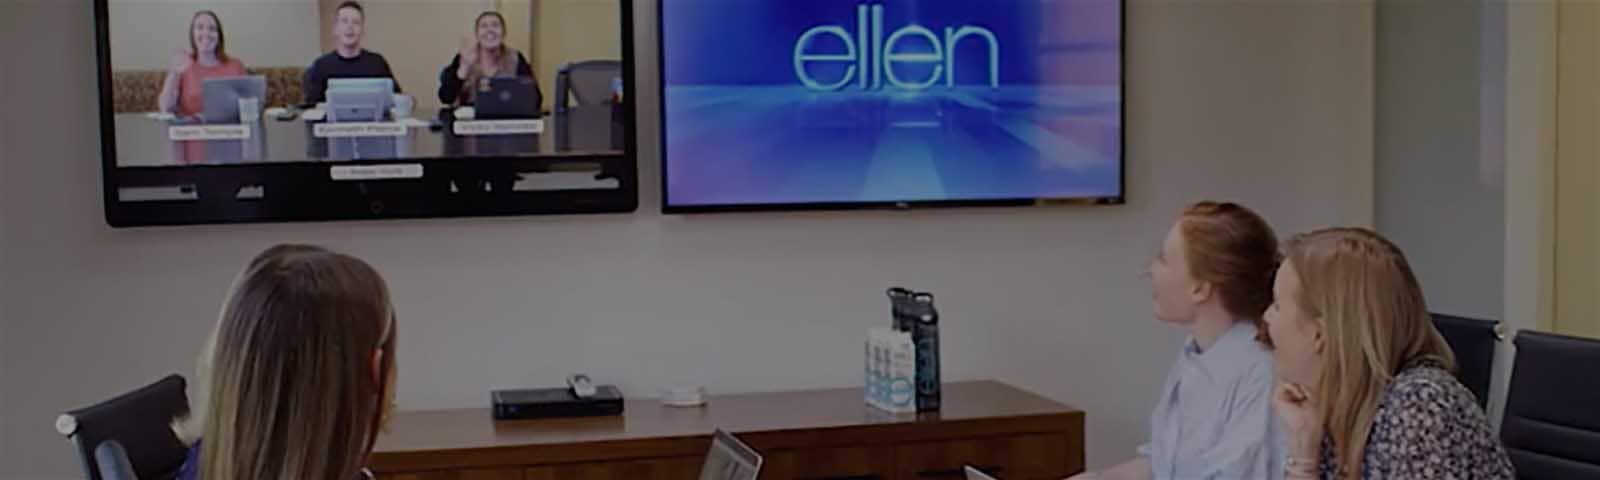 The Ellen Show uses Webex for collaboration